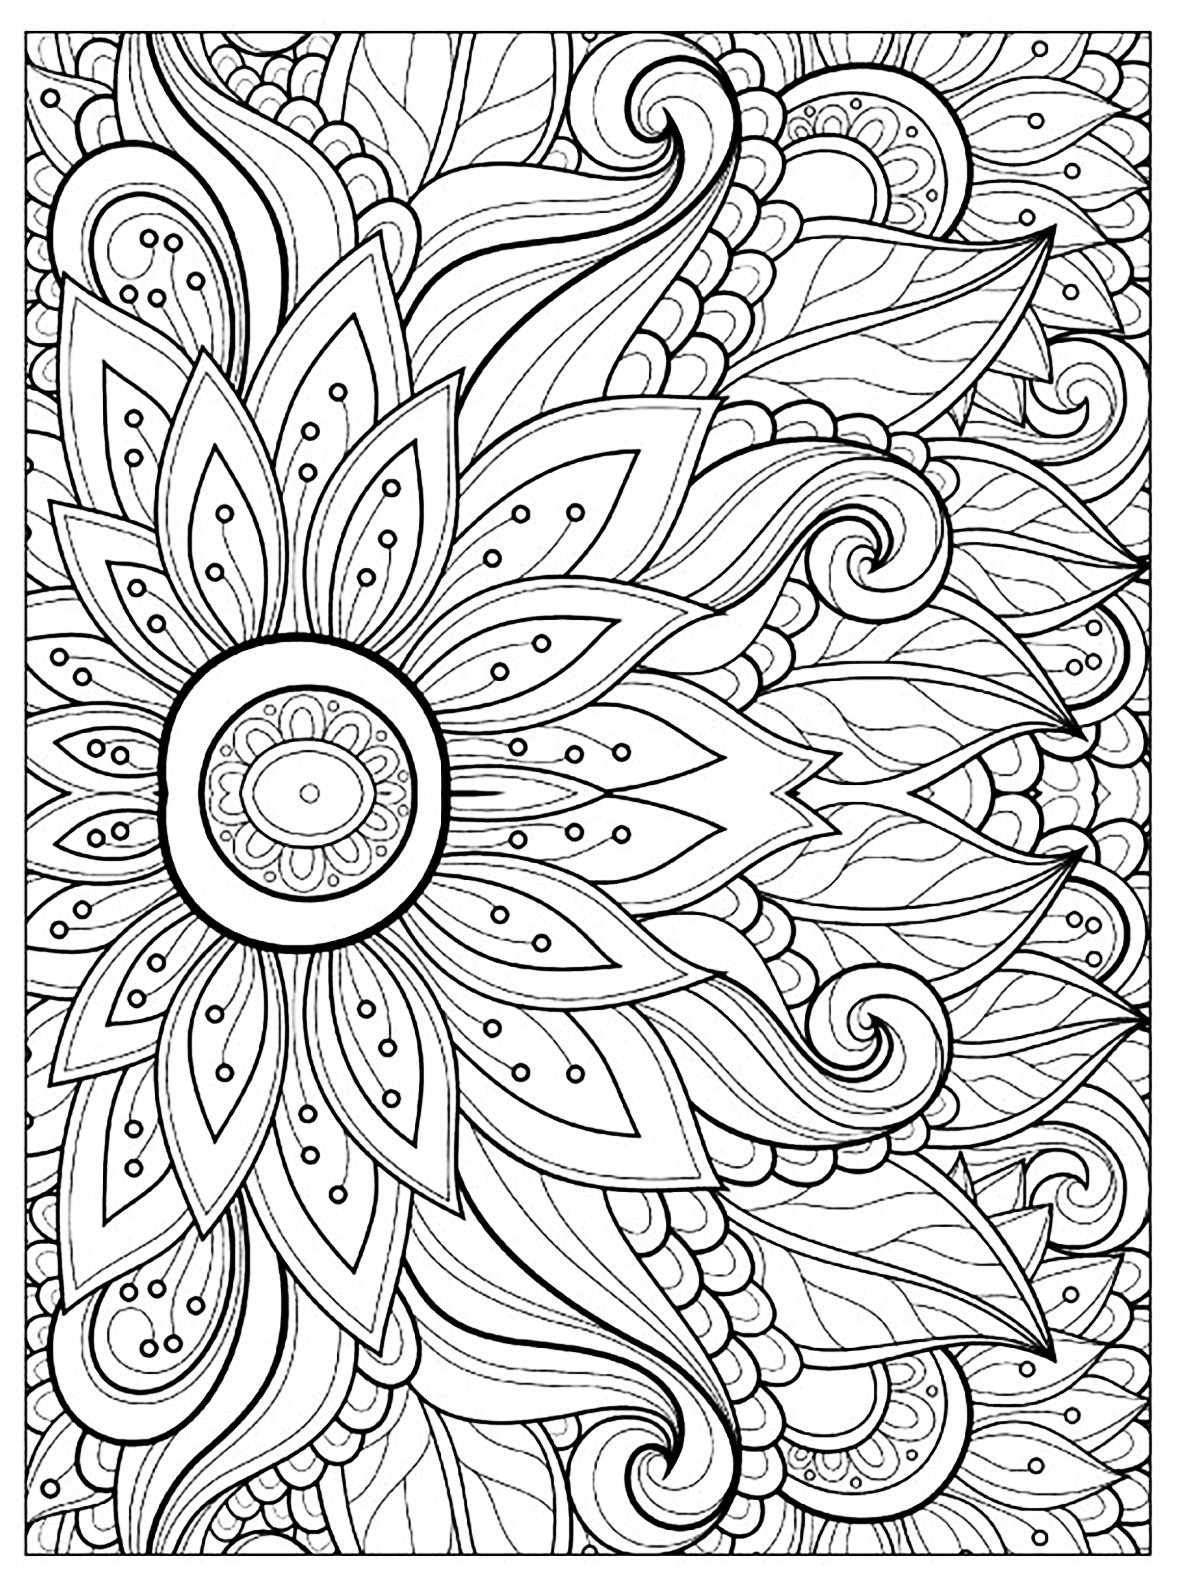 Printable Coloring Pages For Adults Flowers
 Flower with many petals Flowers Adult Coloring Pages